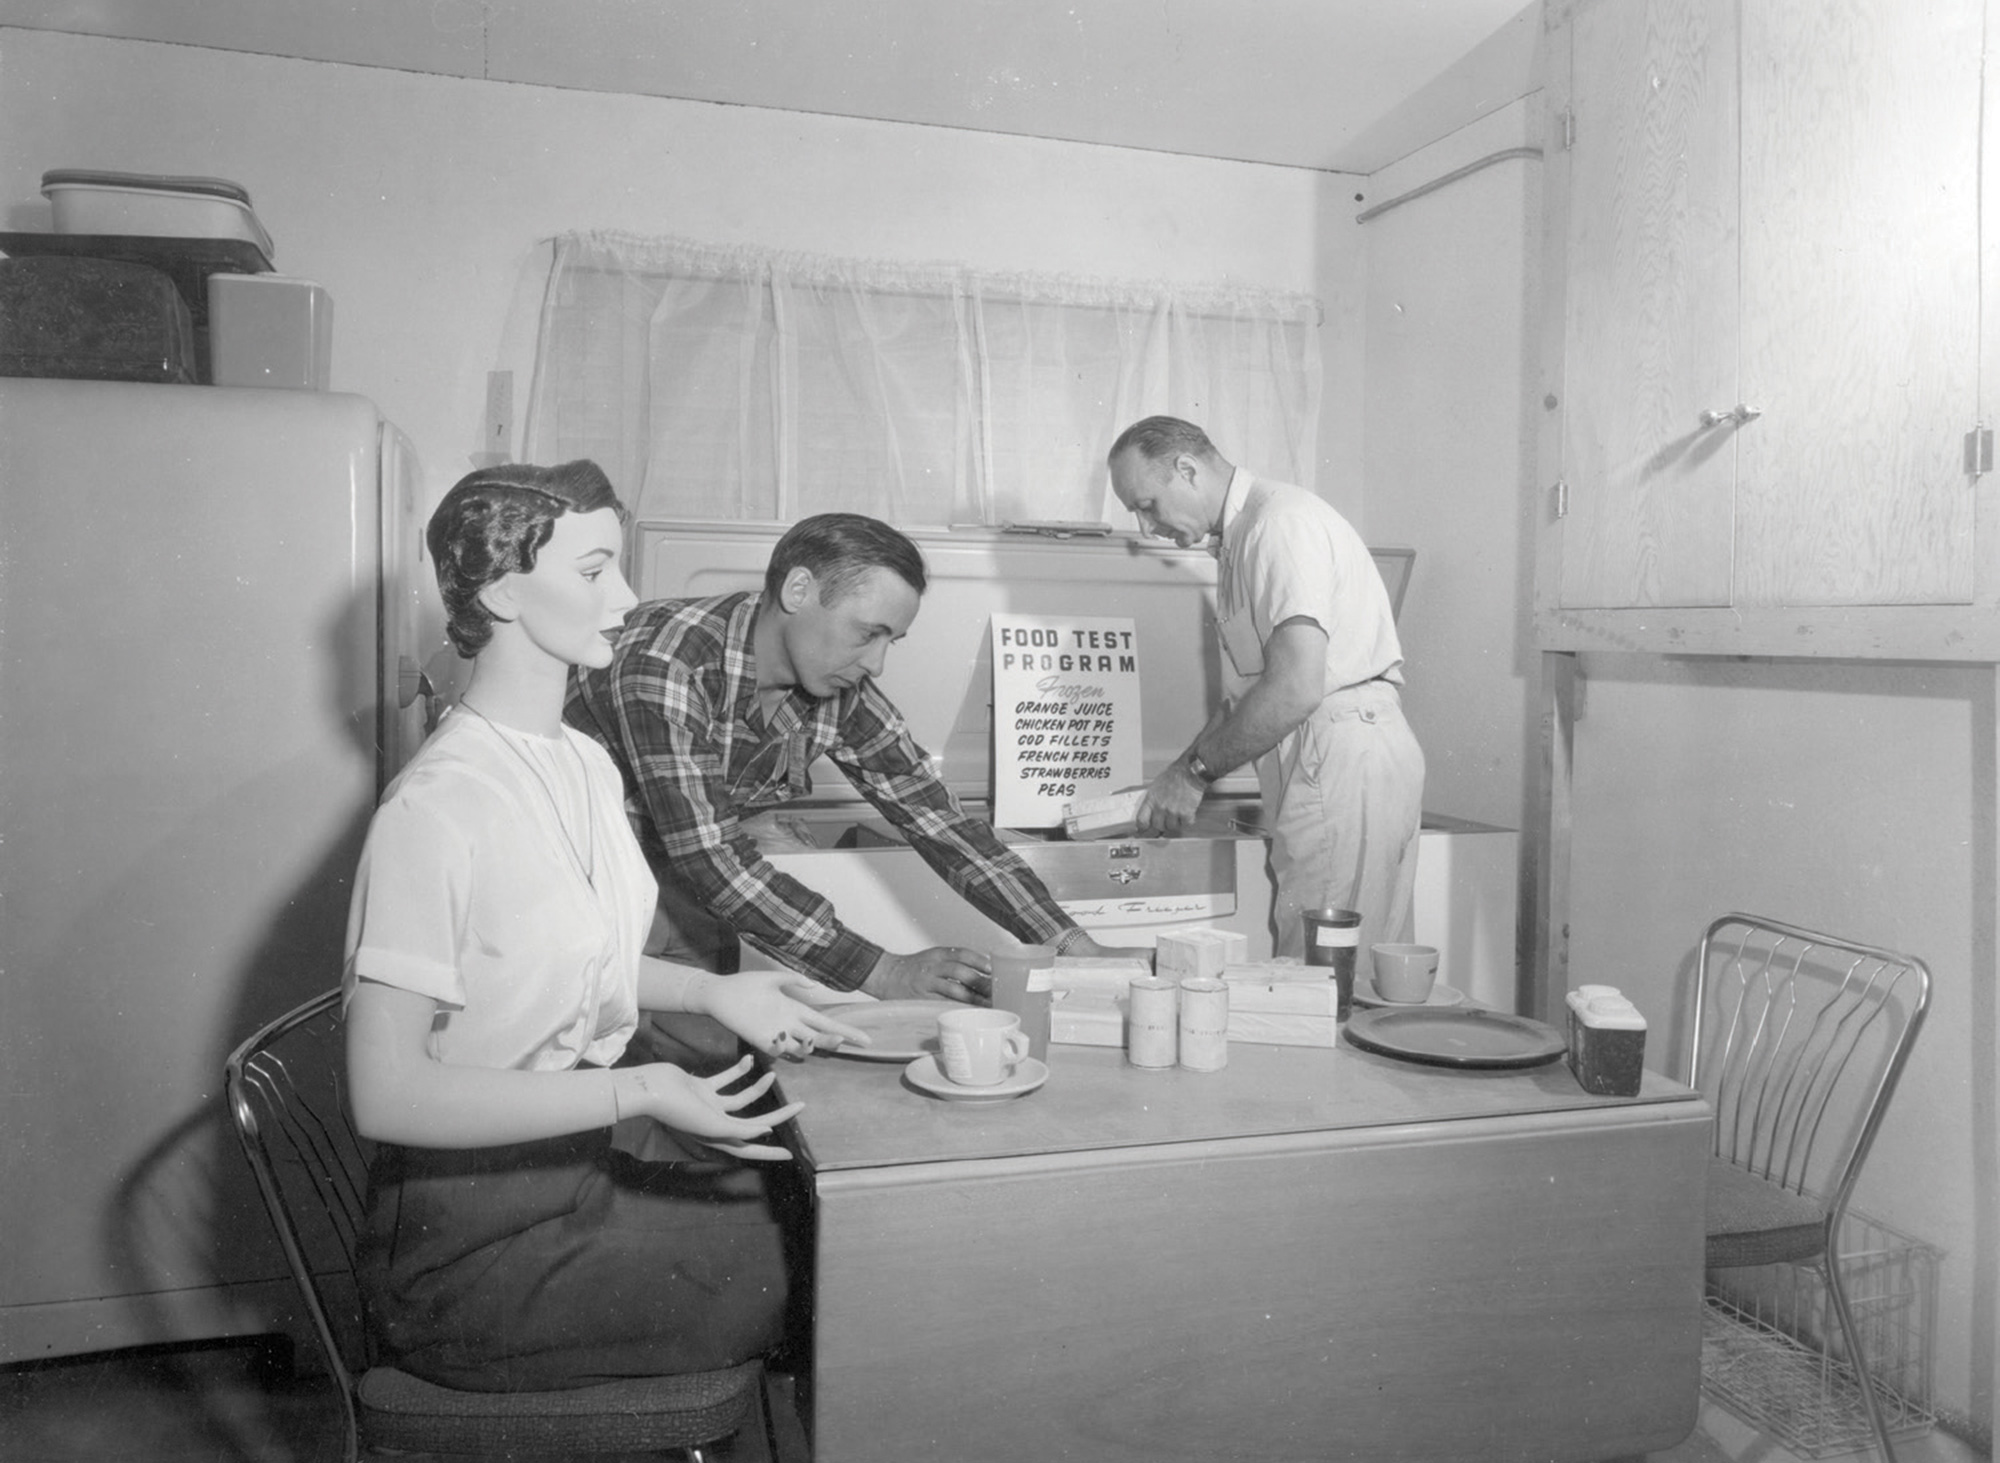 A photograph from Operation Cue depicting two workers installing a female test dummy at a kitchen table.